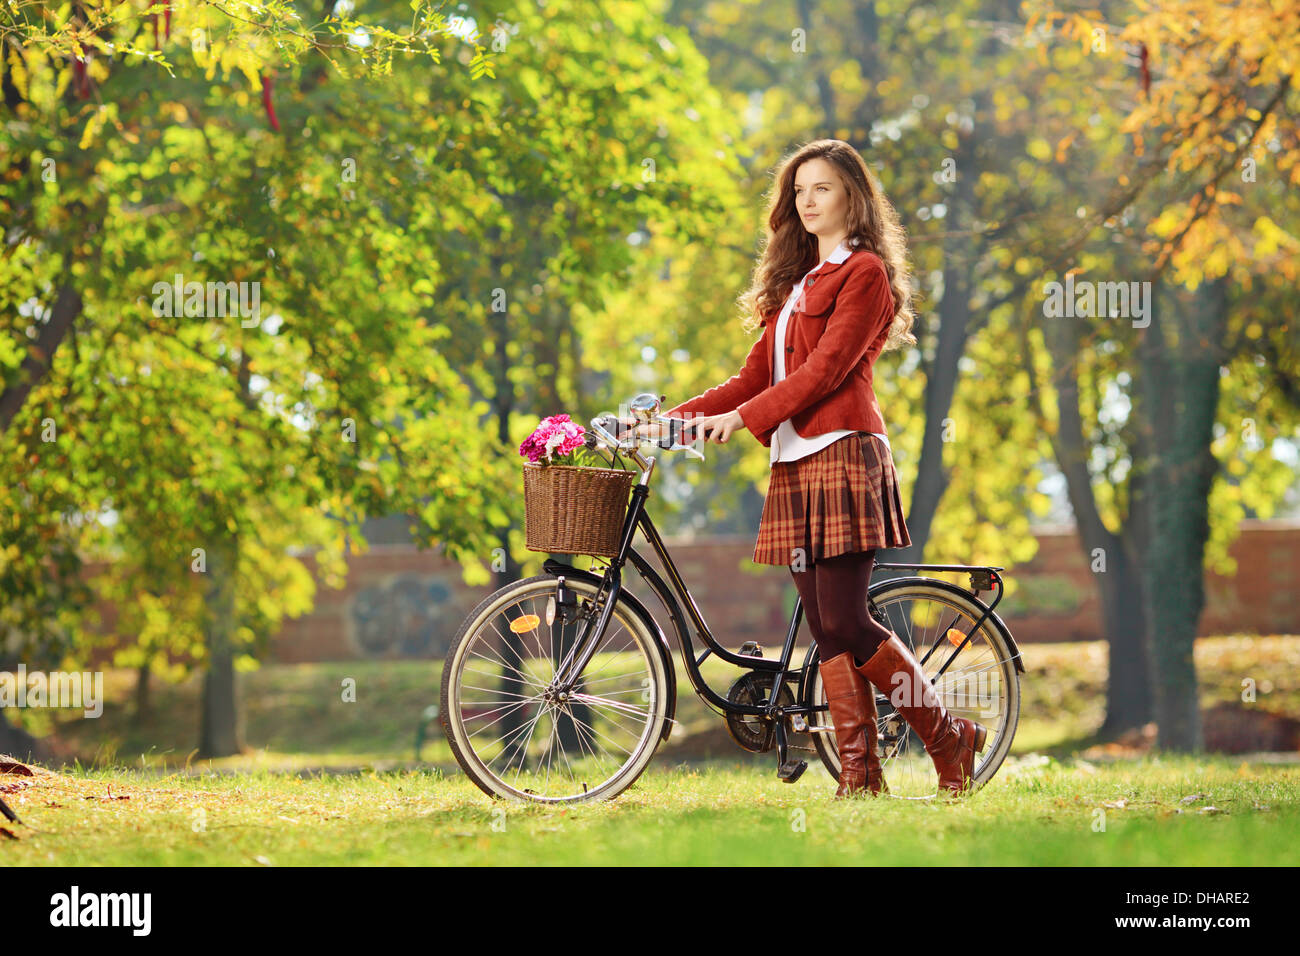 Young female walking with bicycle in park Stock Photo